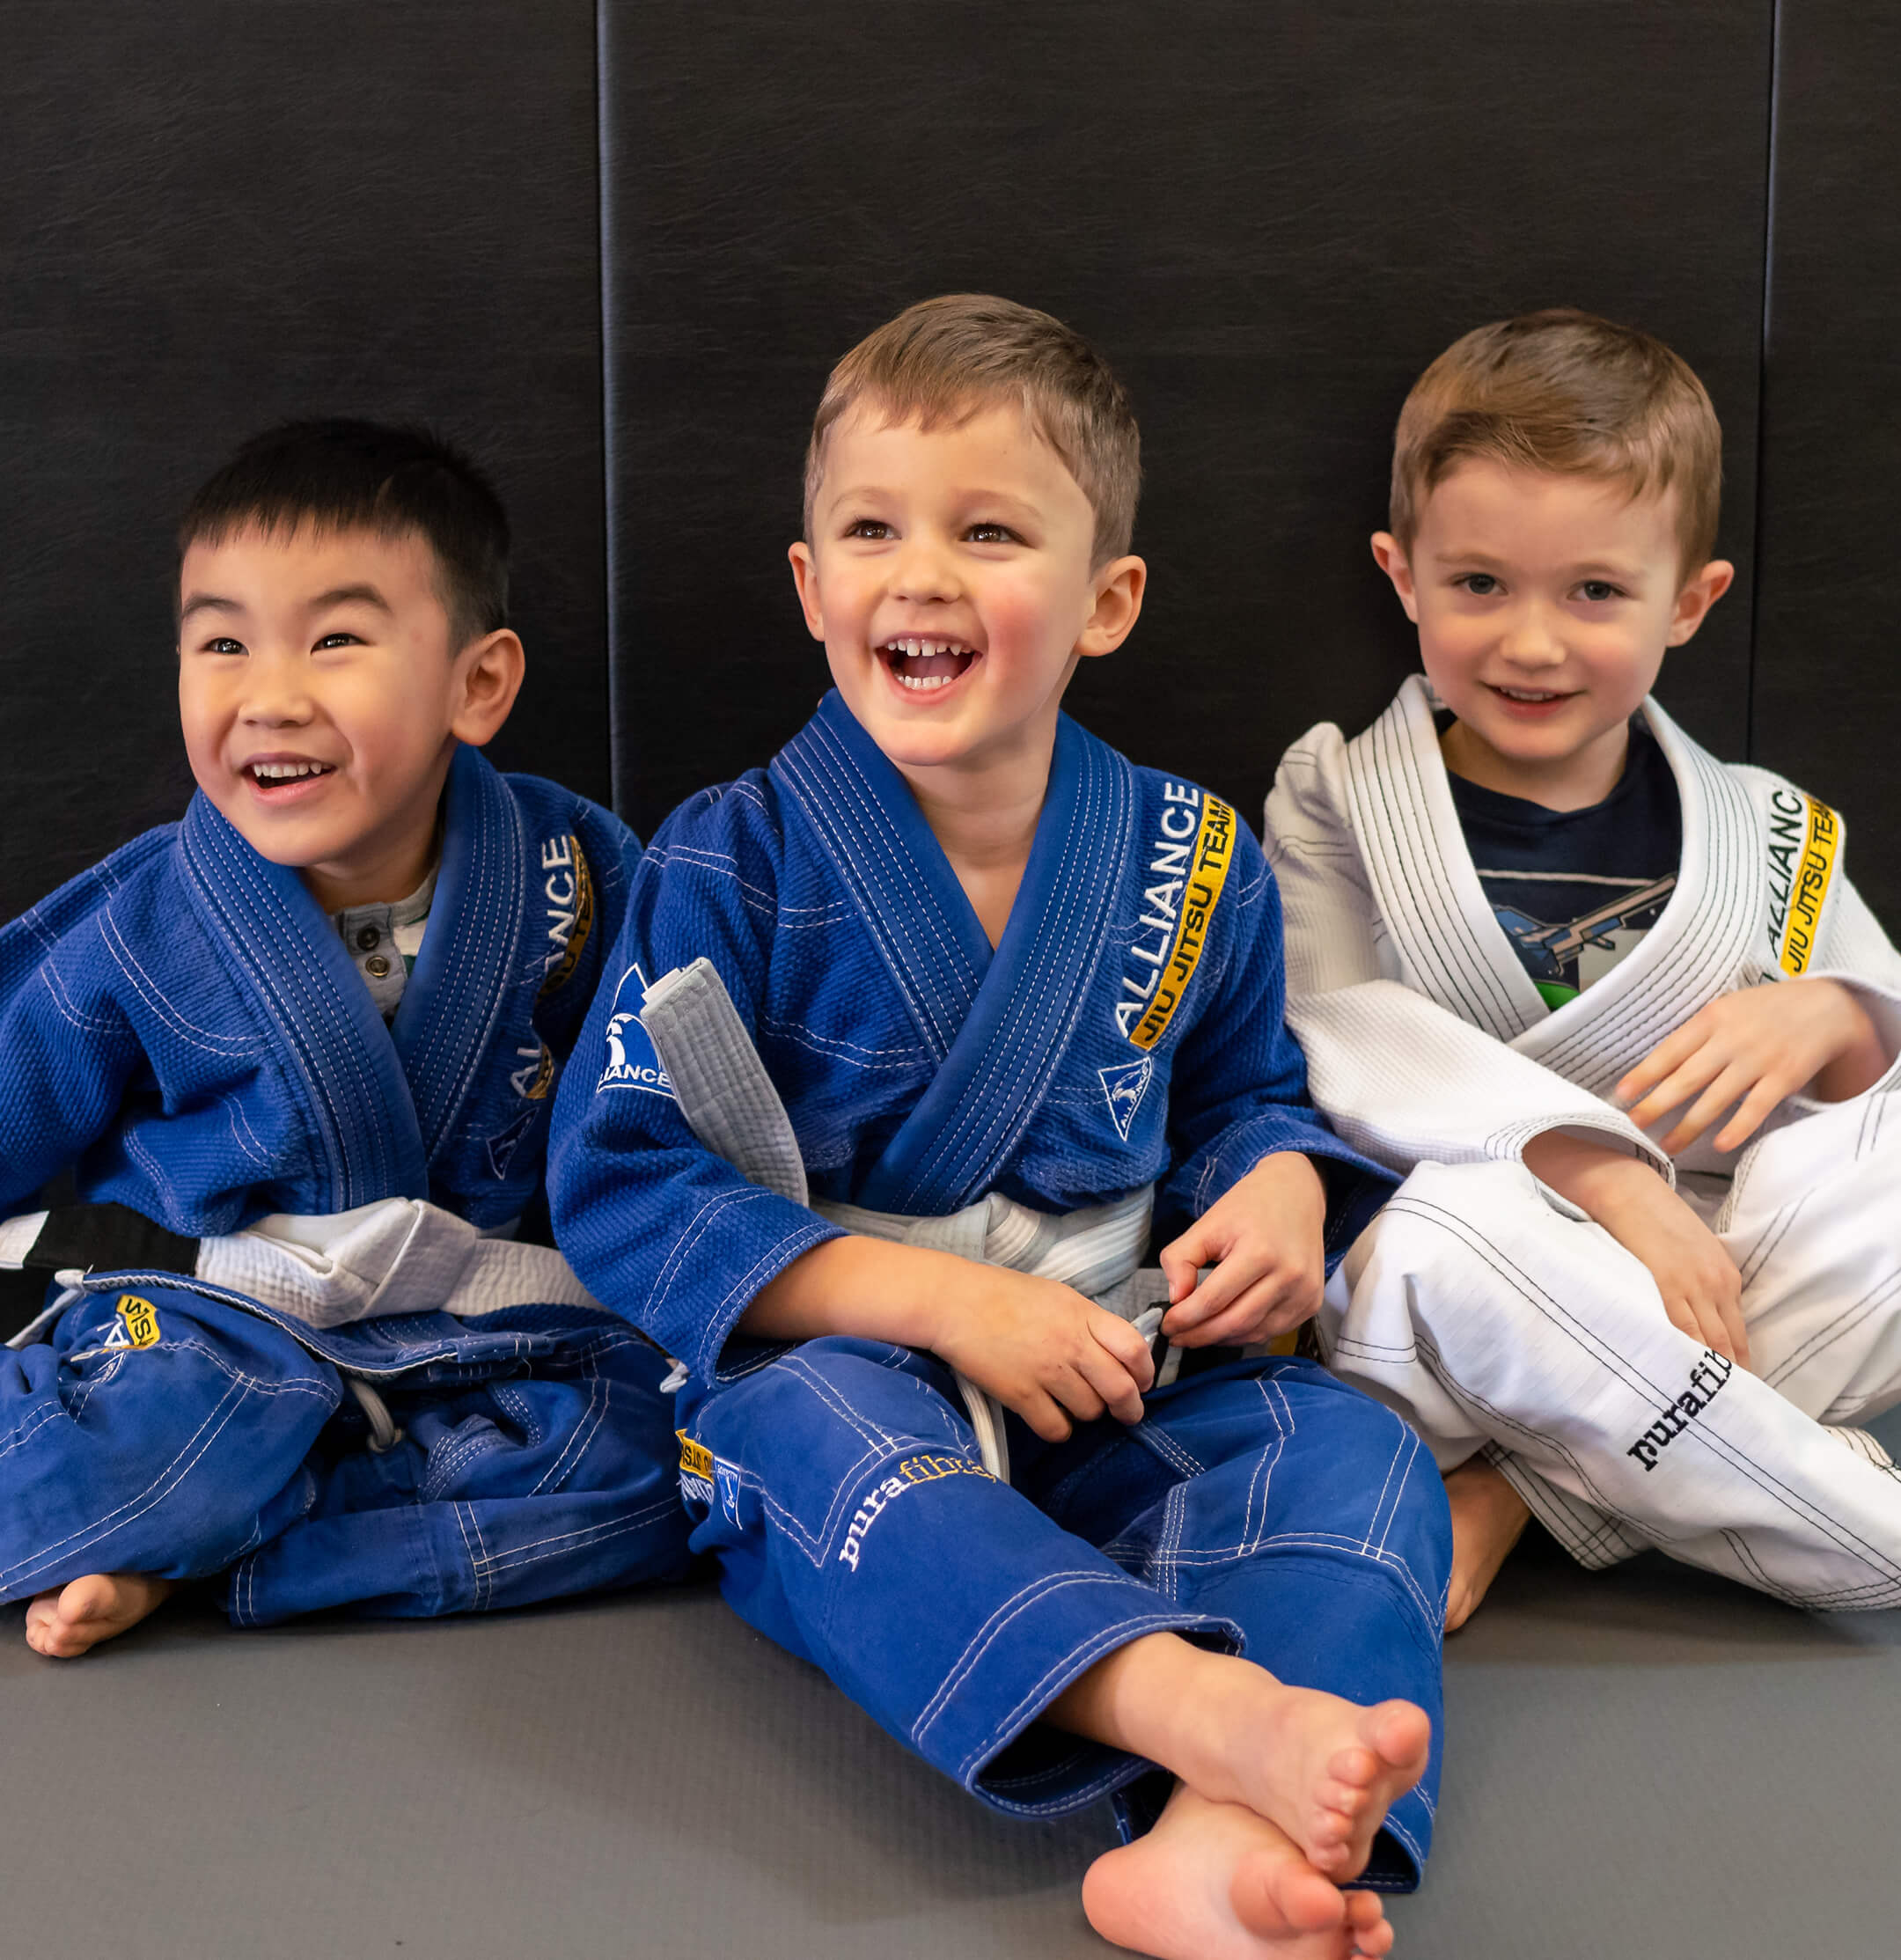 best jiu jitsu moves to teach kid for competition